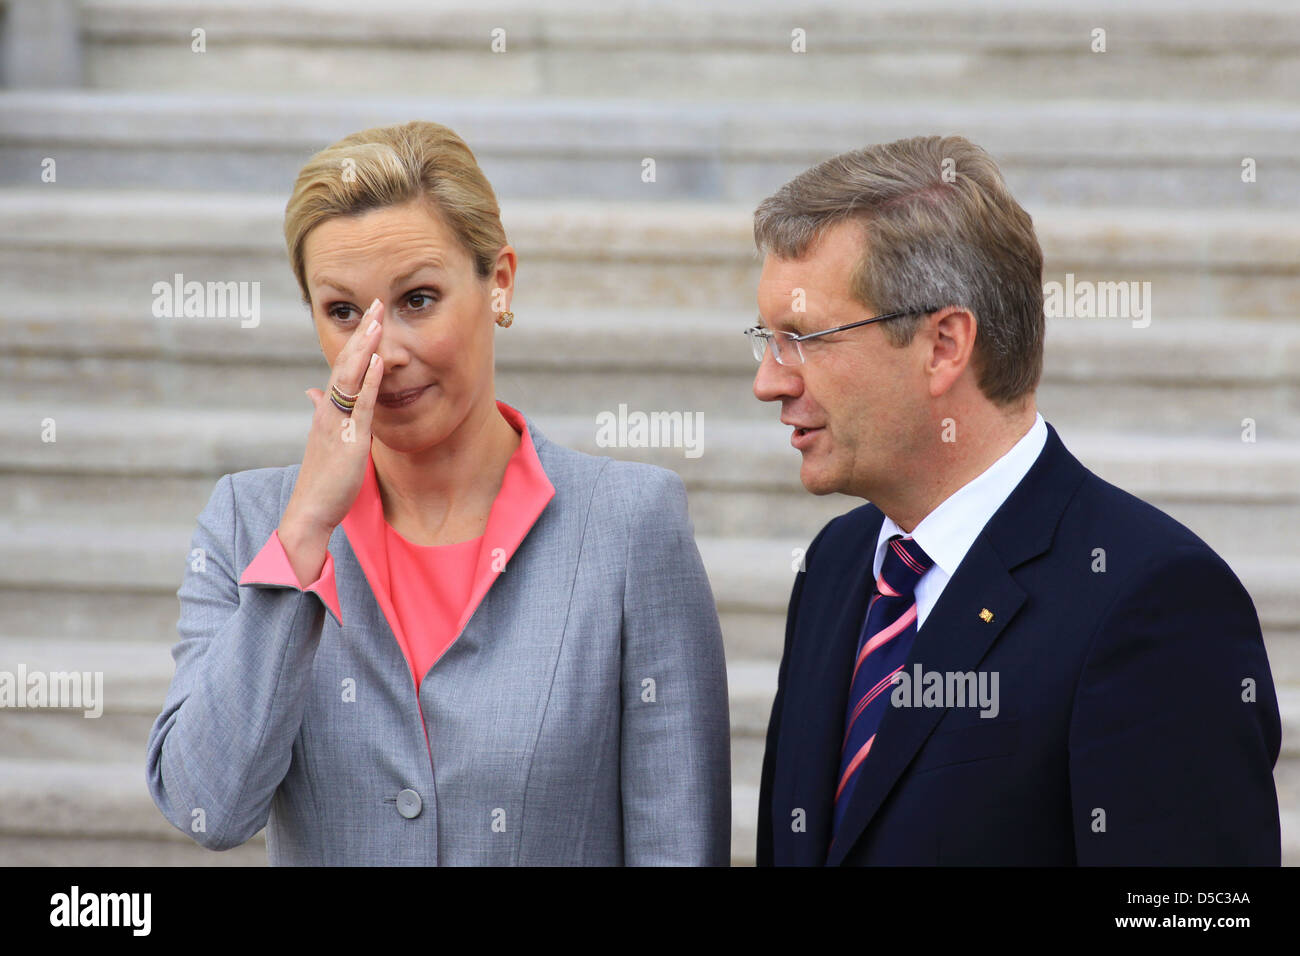 Bettina Wulff and Christian Wulff at the official military greetings for the pope at Schloss castle Bellevue. Berlin, Germany - Stock Photo